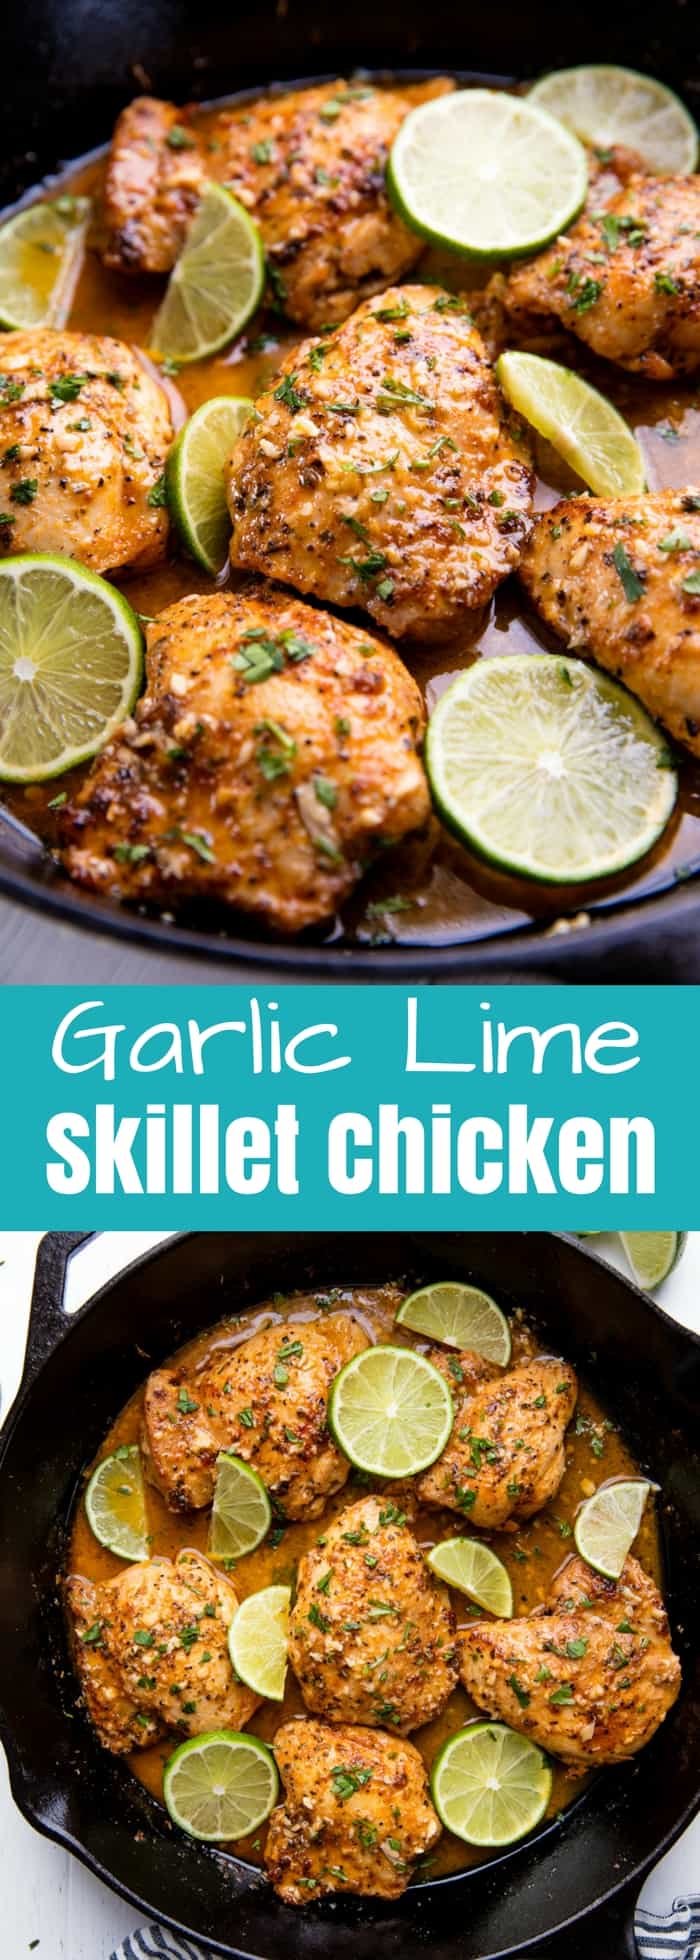 This Garlic Lime Skillet Chicken is a simple, easy dinner idea that will get a tasty dinner on the table fast. 